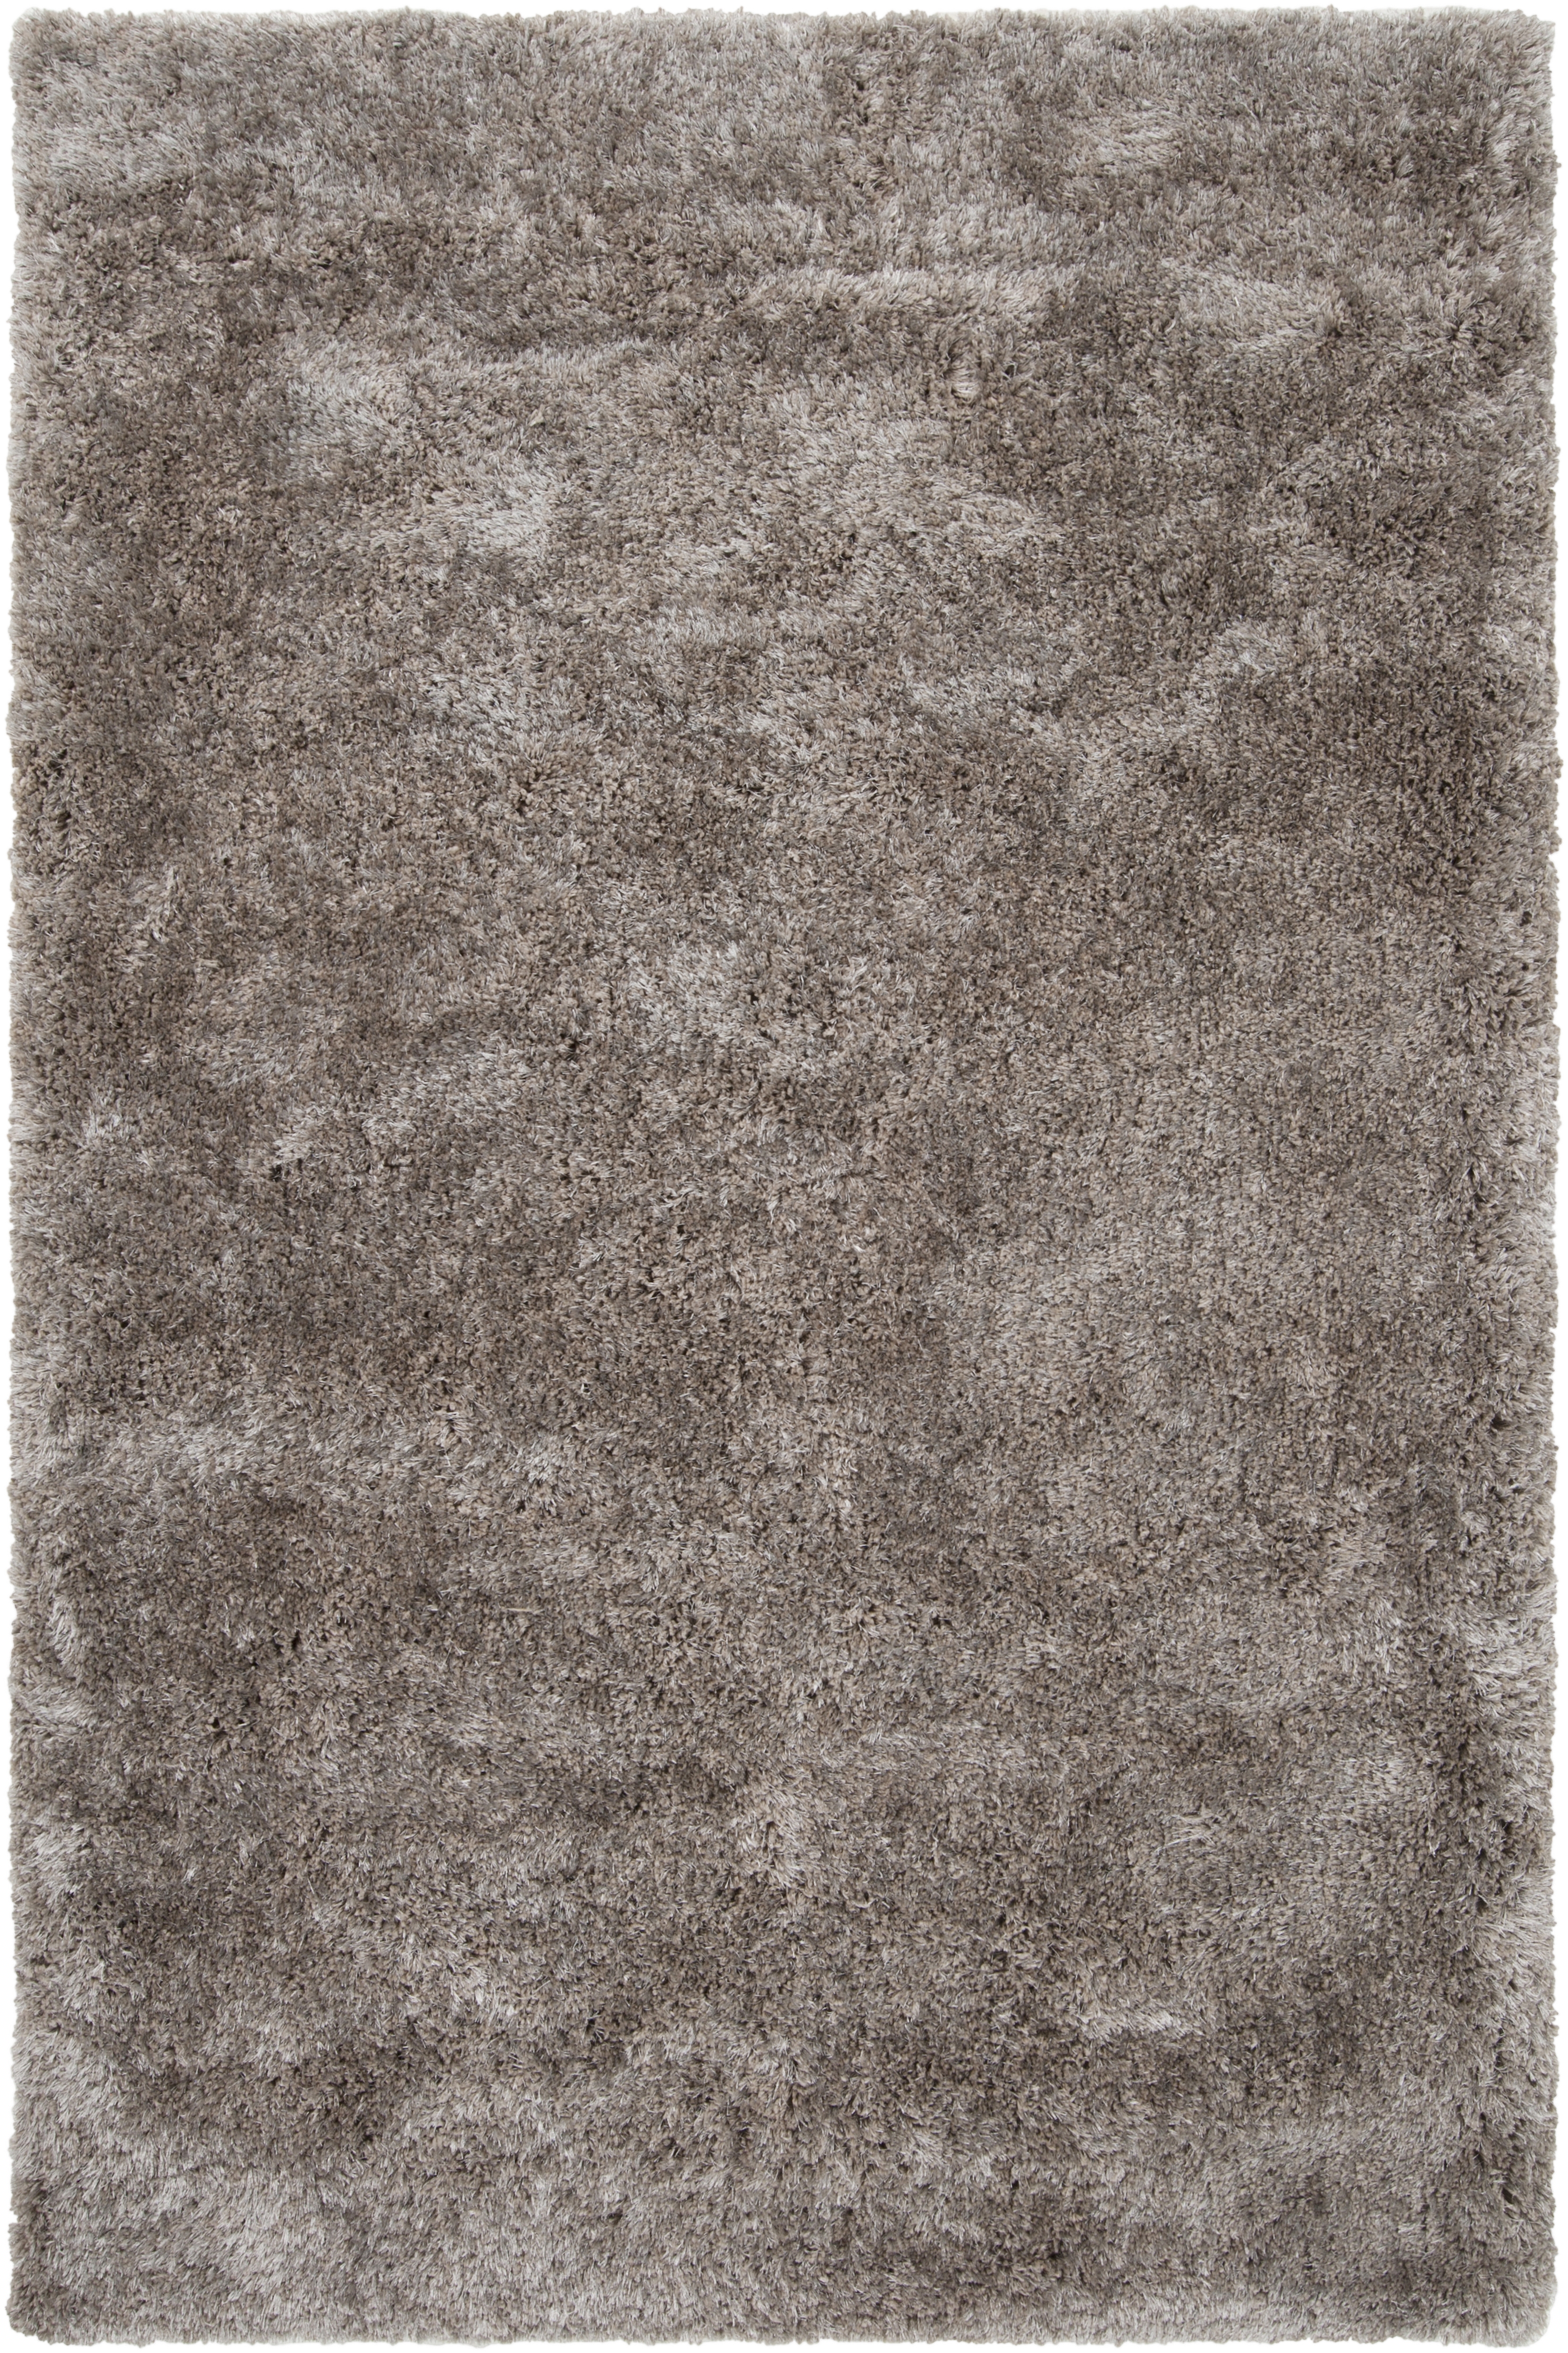 Grizzly Rug, 2' x 3' - Image 0